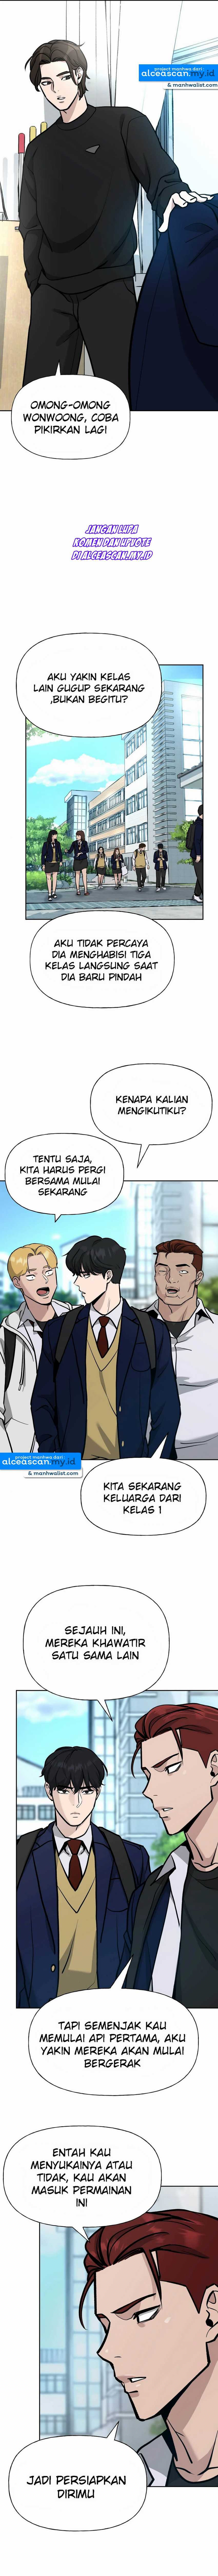 The Bully In Charge Chapter 10